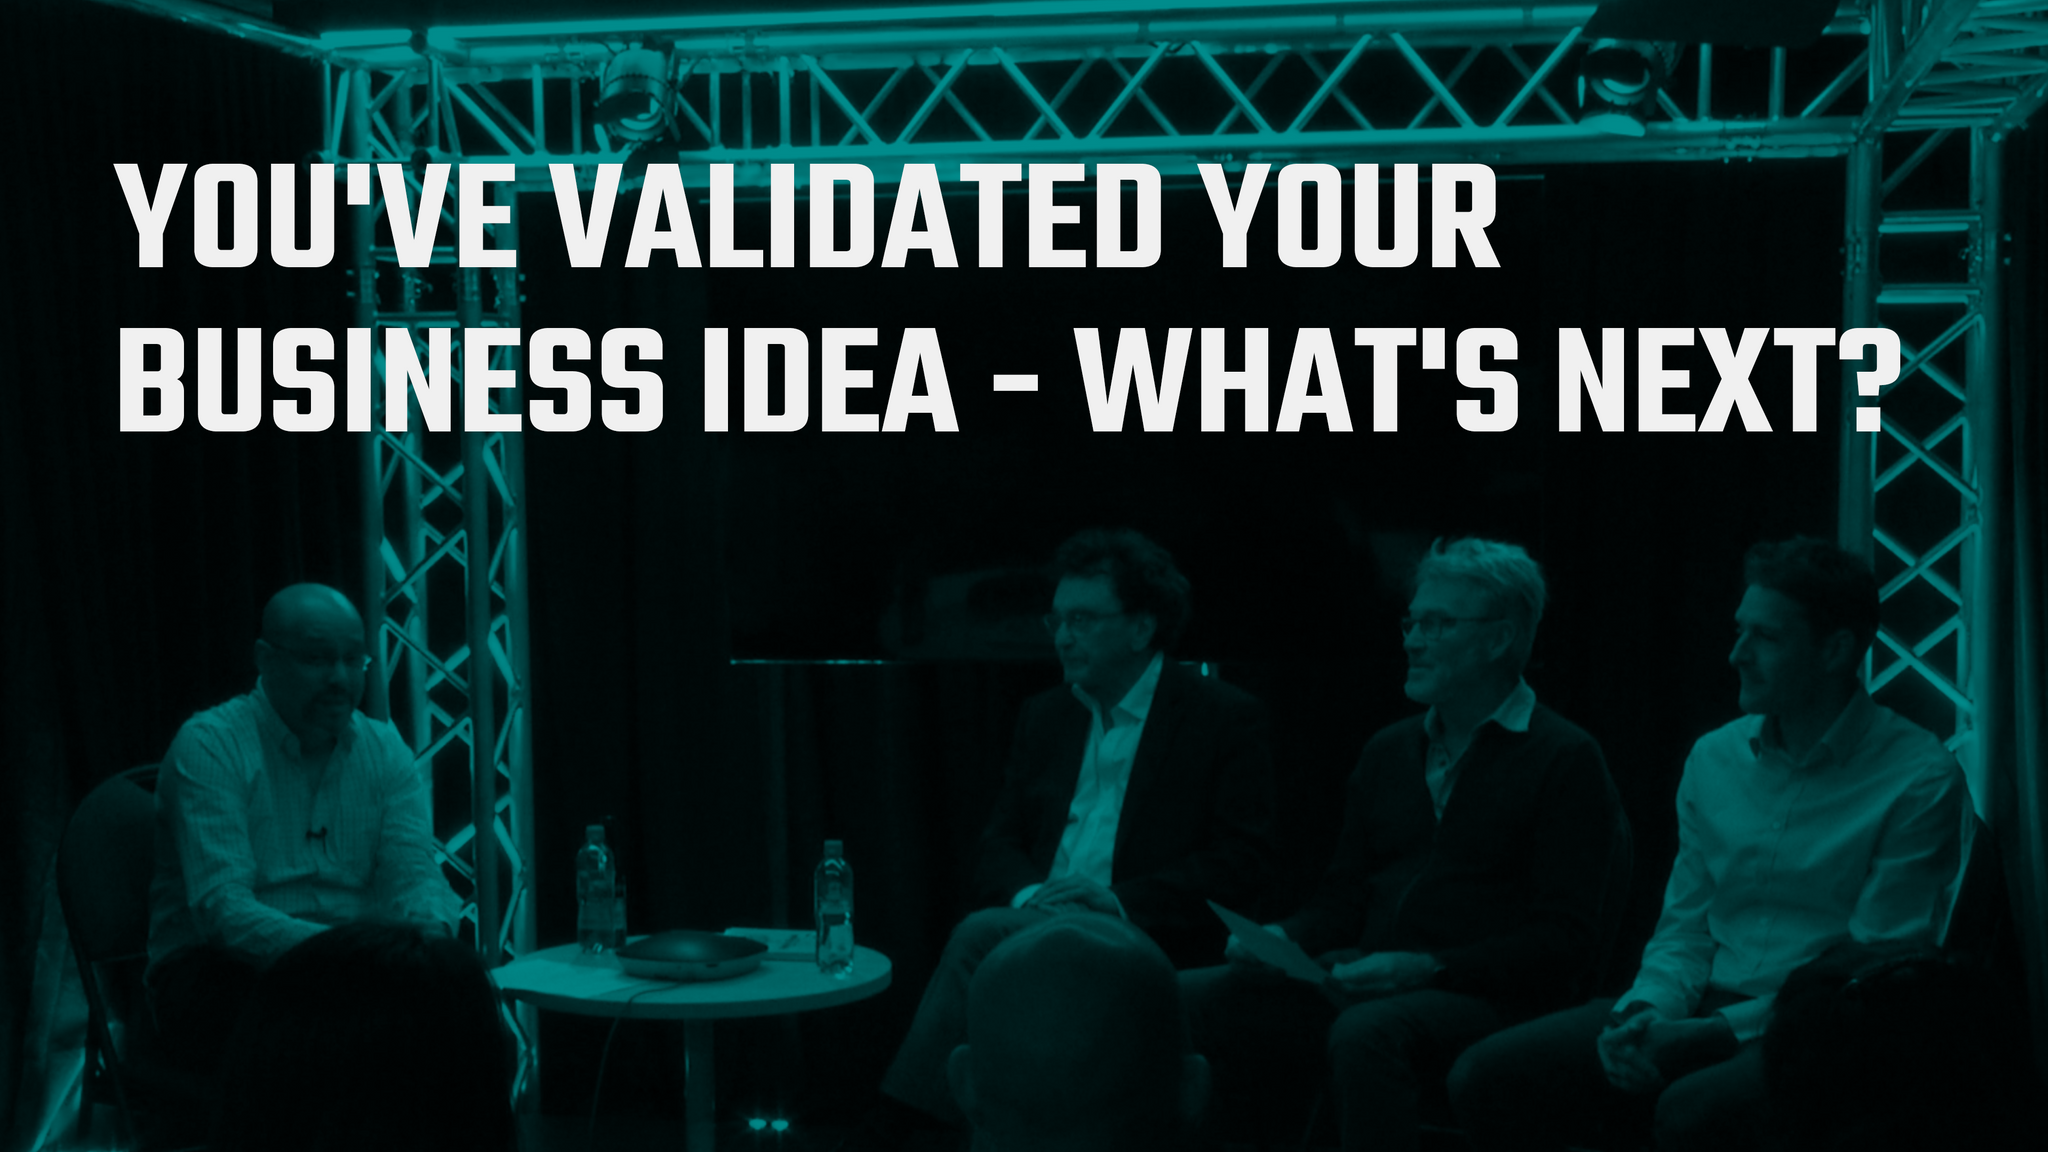 You've validated your business idea - what's next? 